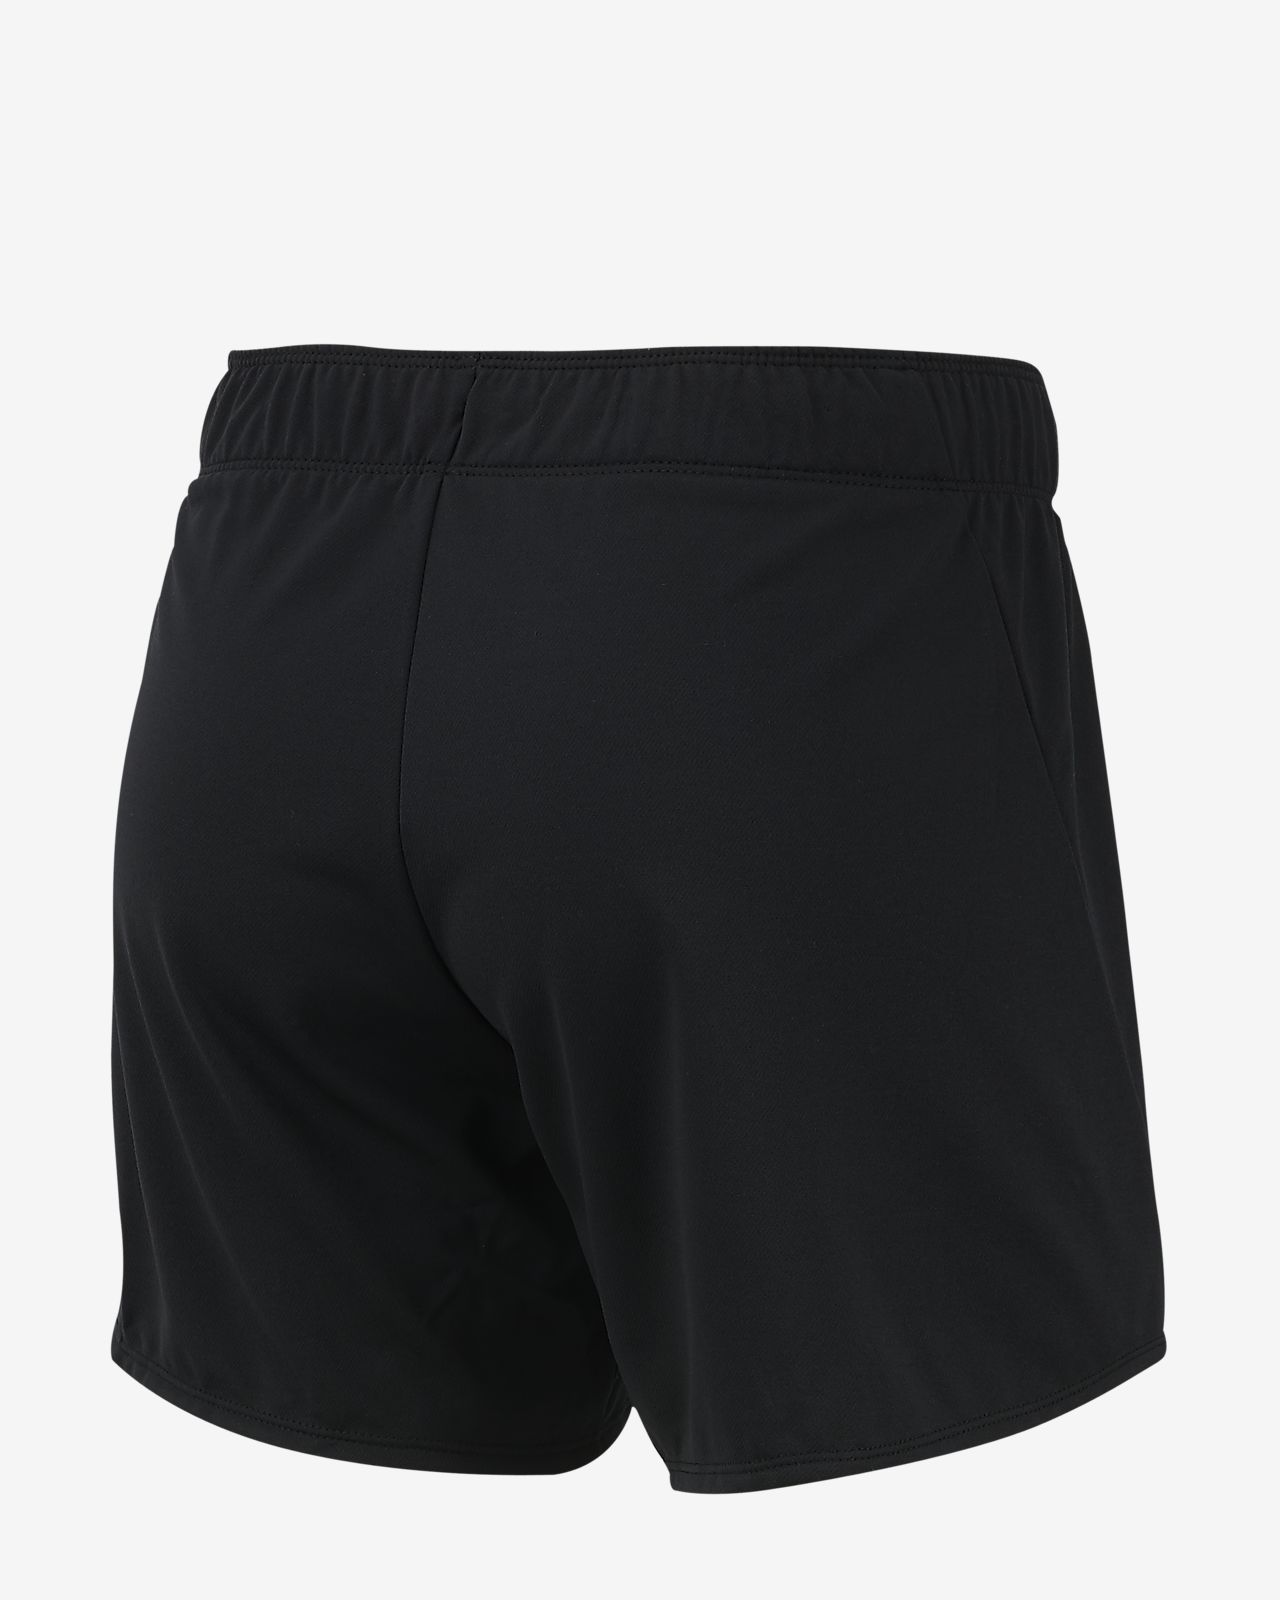 nike dri fit women's shorts with 